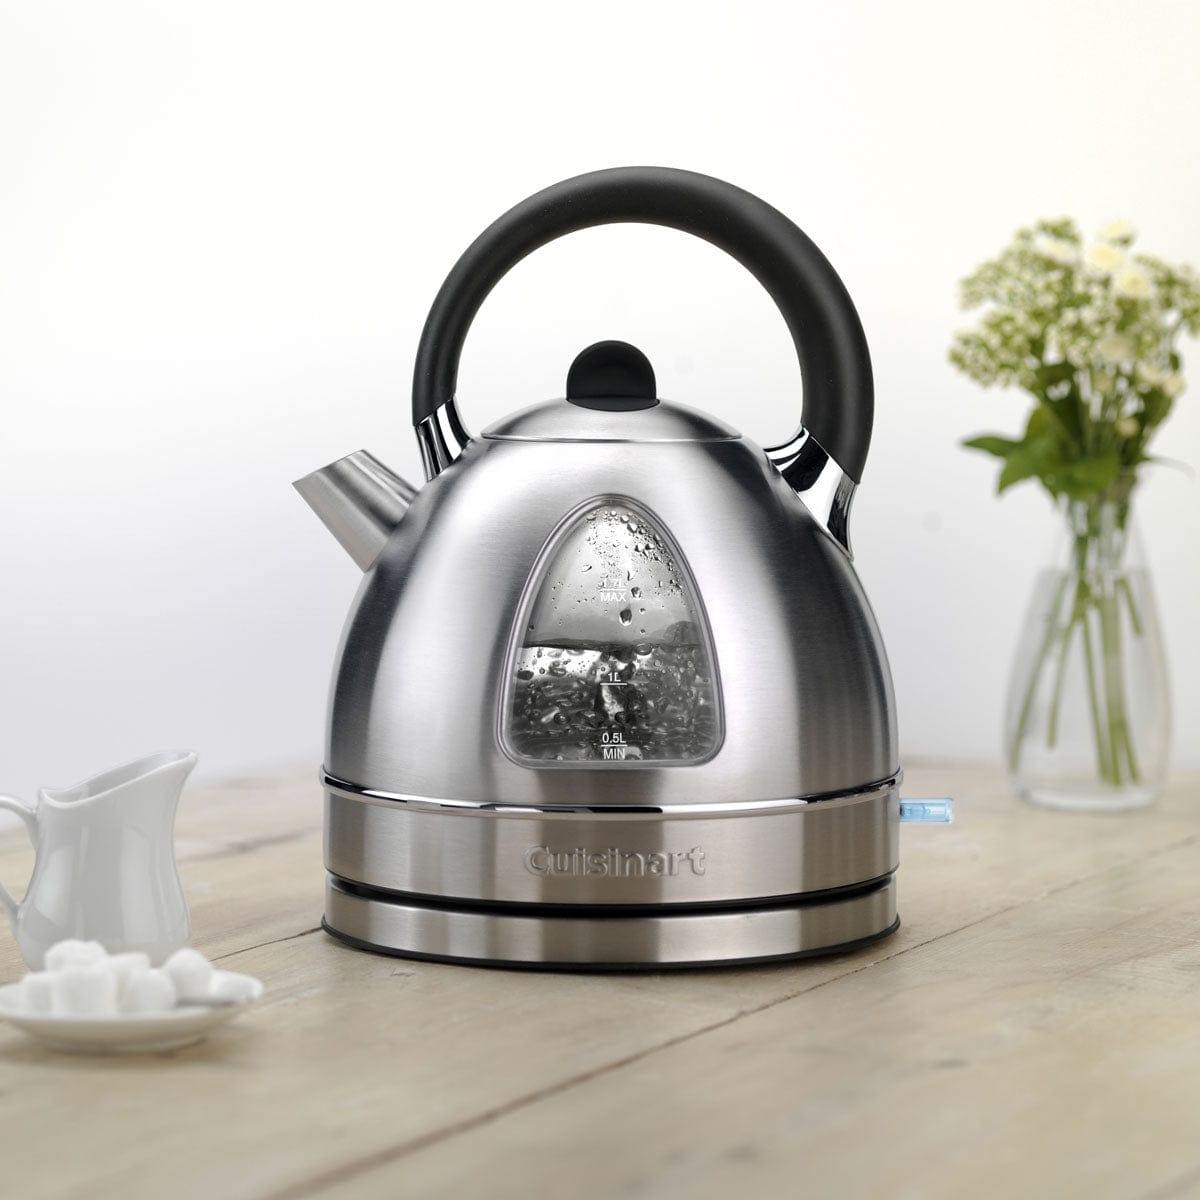 Cuisinart CTK17U Signature Collection Traditional Kettle